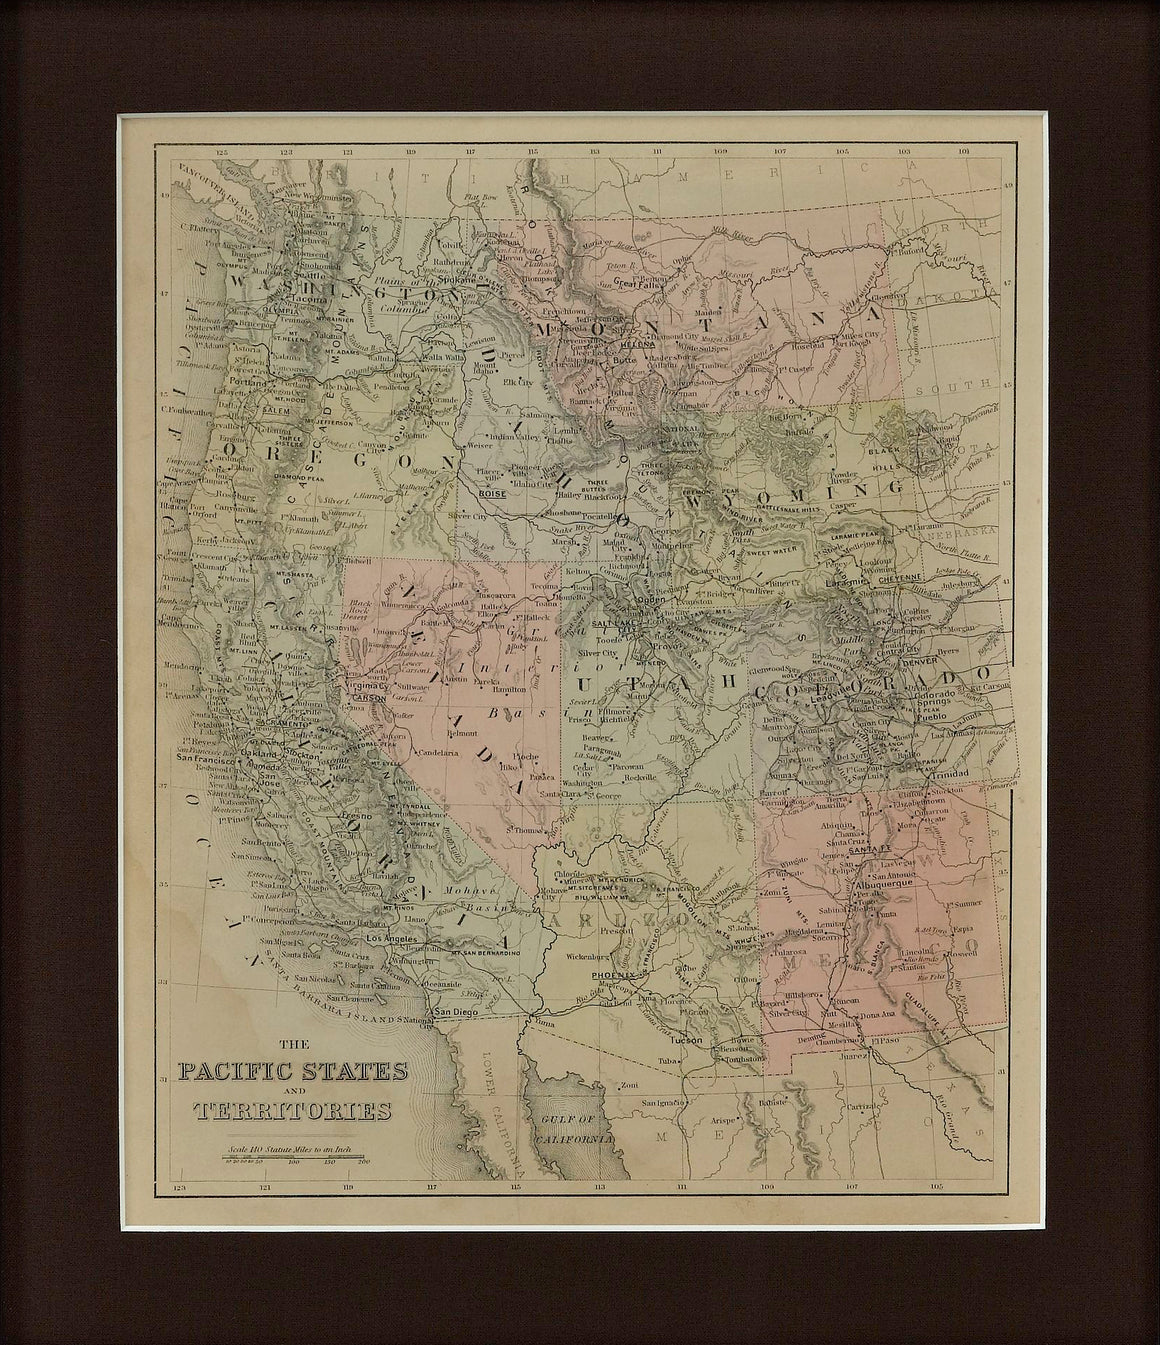 1889 "The Pacific States and Territories"